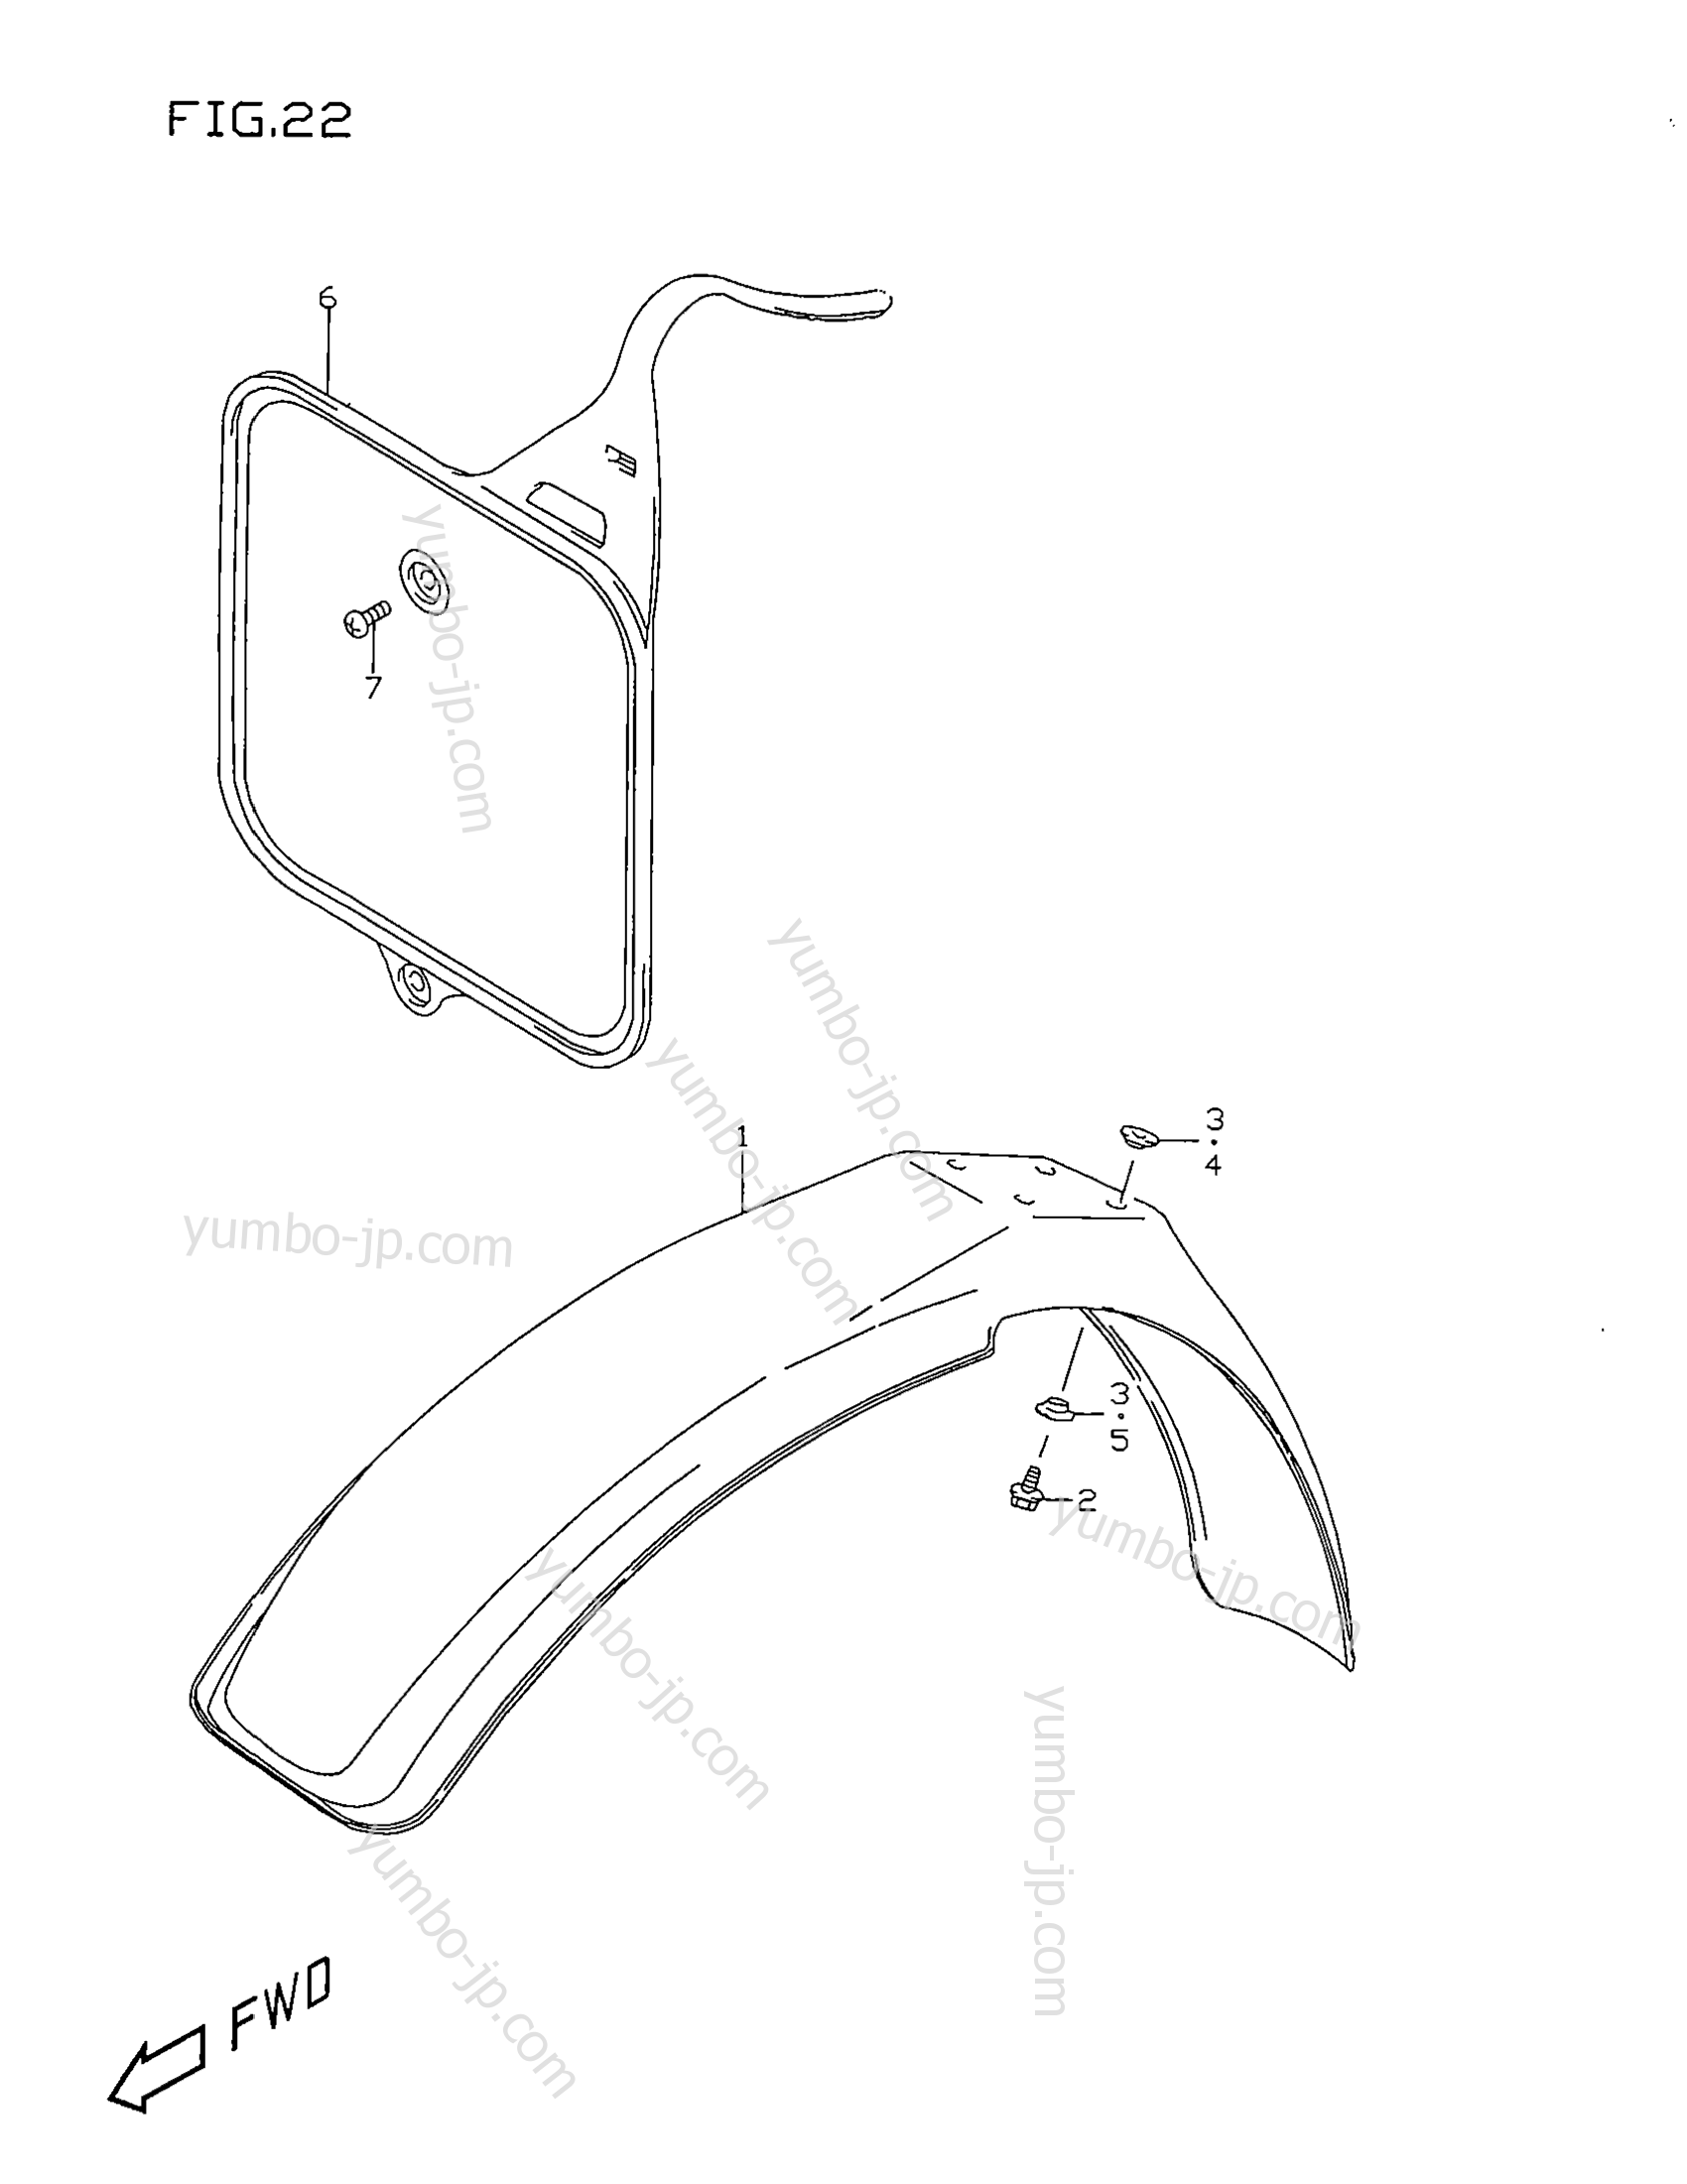 FRONT FENDER for motorcycles SUZUKI RM80 1998 year